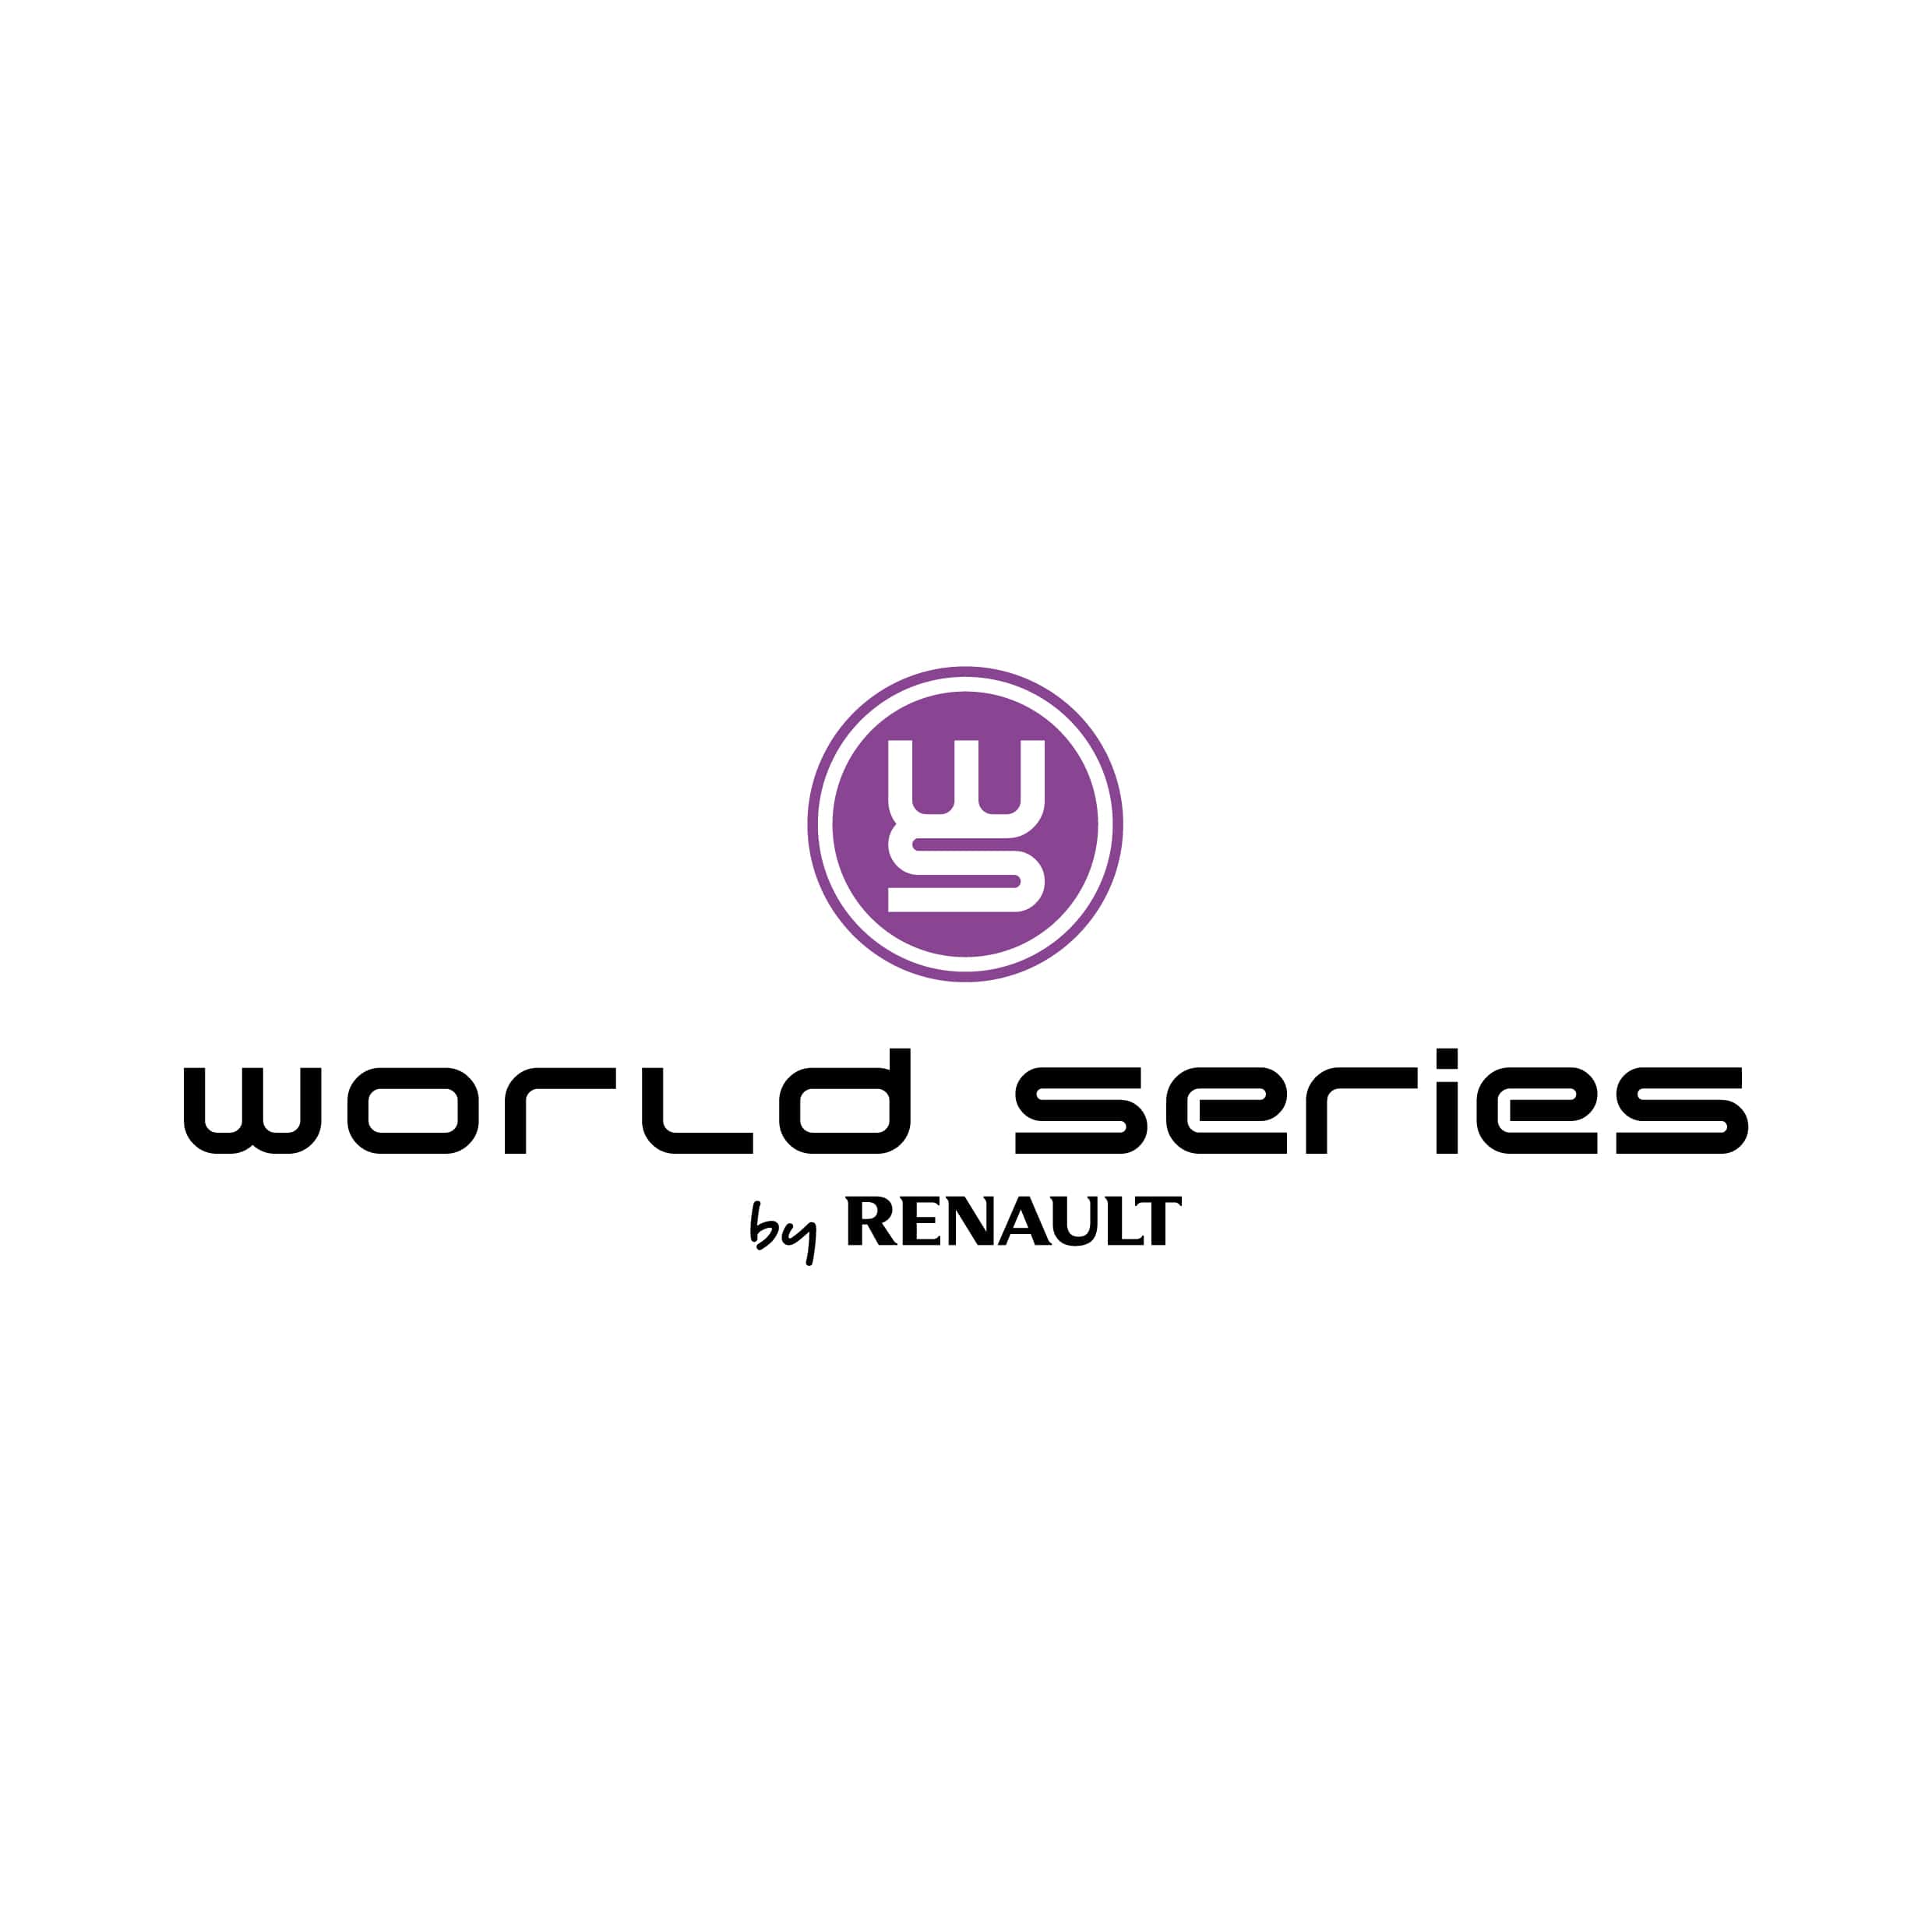 stickers-world-series-by-renault-ref110-autocollant-voiture-sticker-auto-autocollants-decals-sponsors-racing-tuning-sport-logo-min